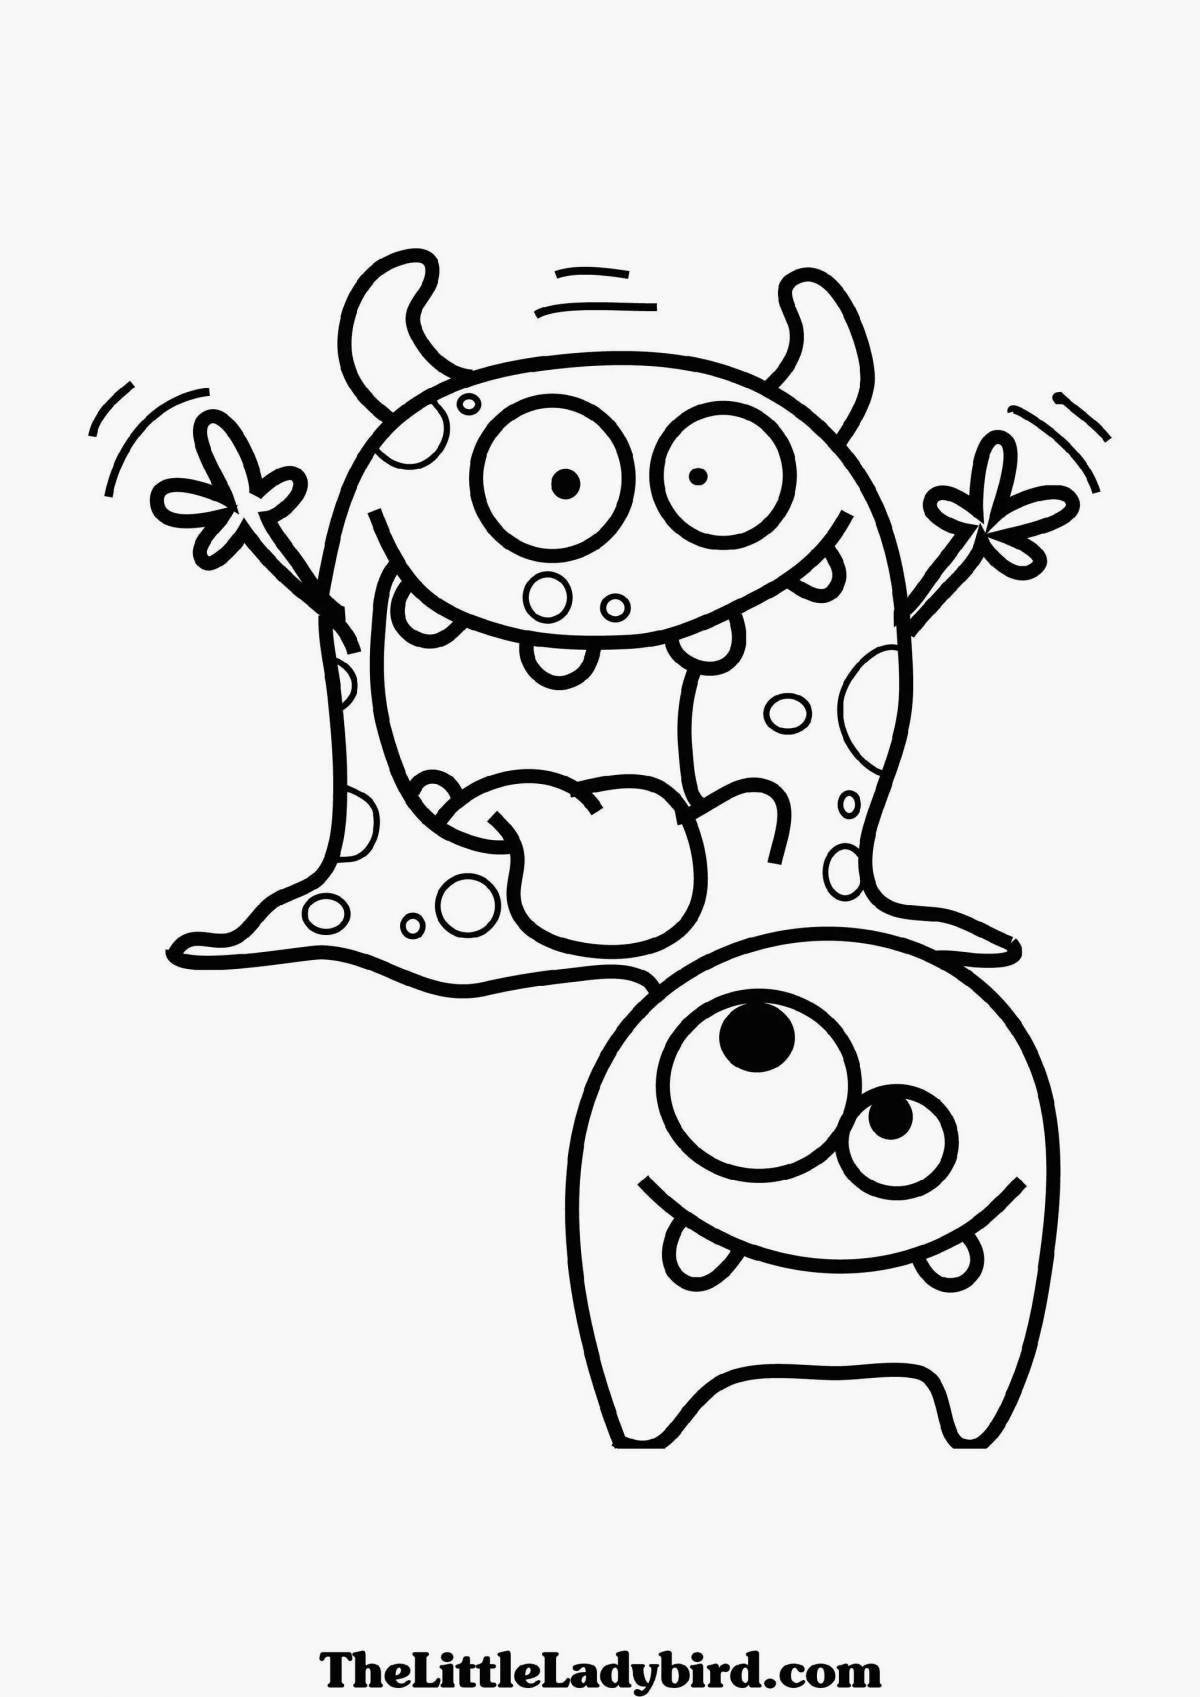 Wiggly coloring page monsters baby